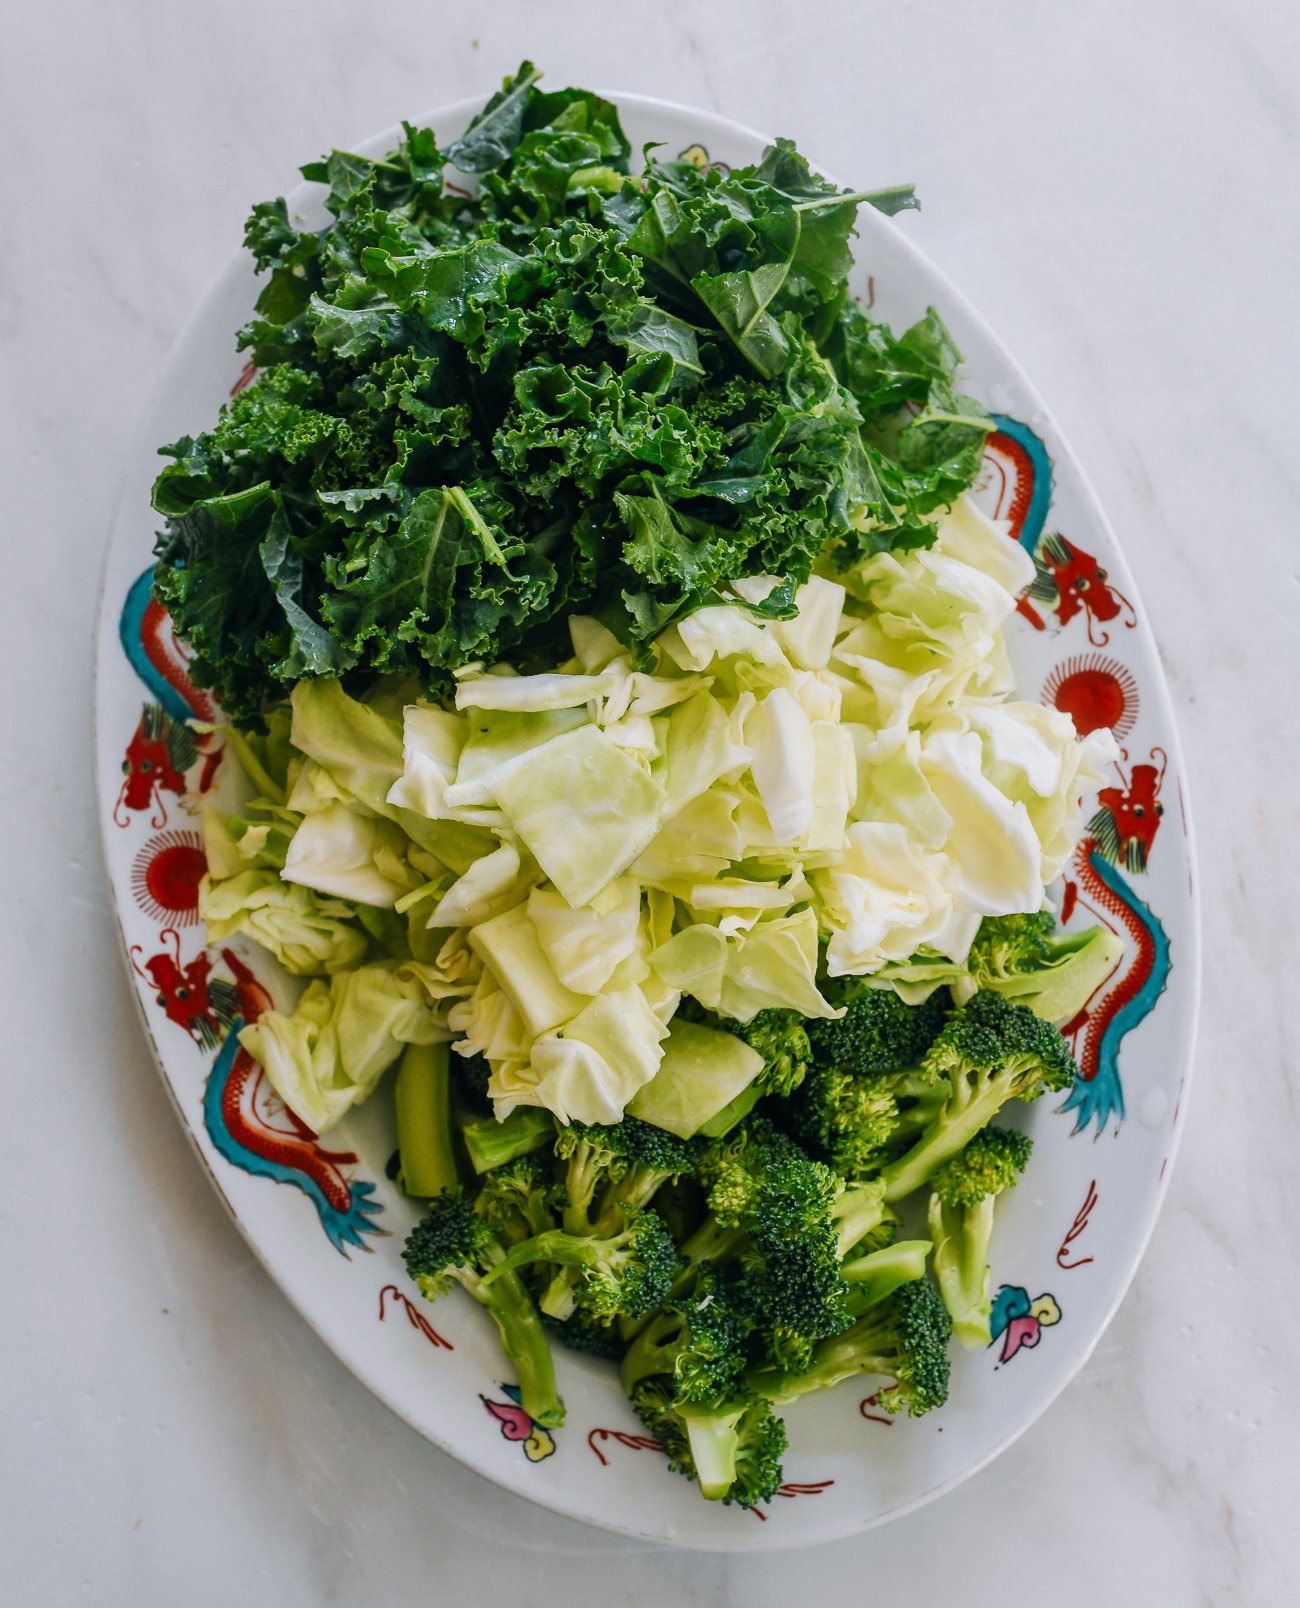 washed kale, cabbage, and broccoli